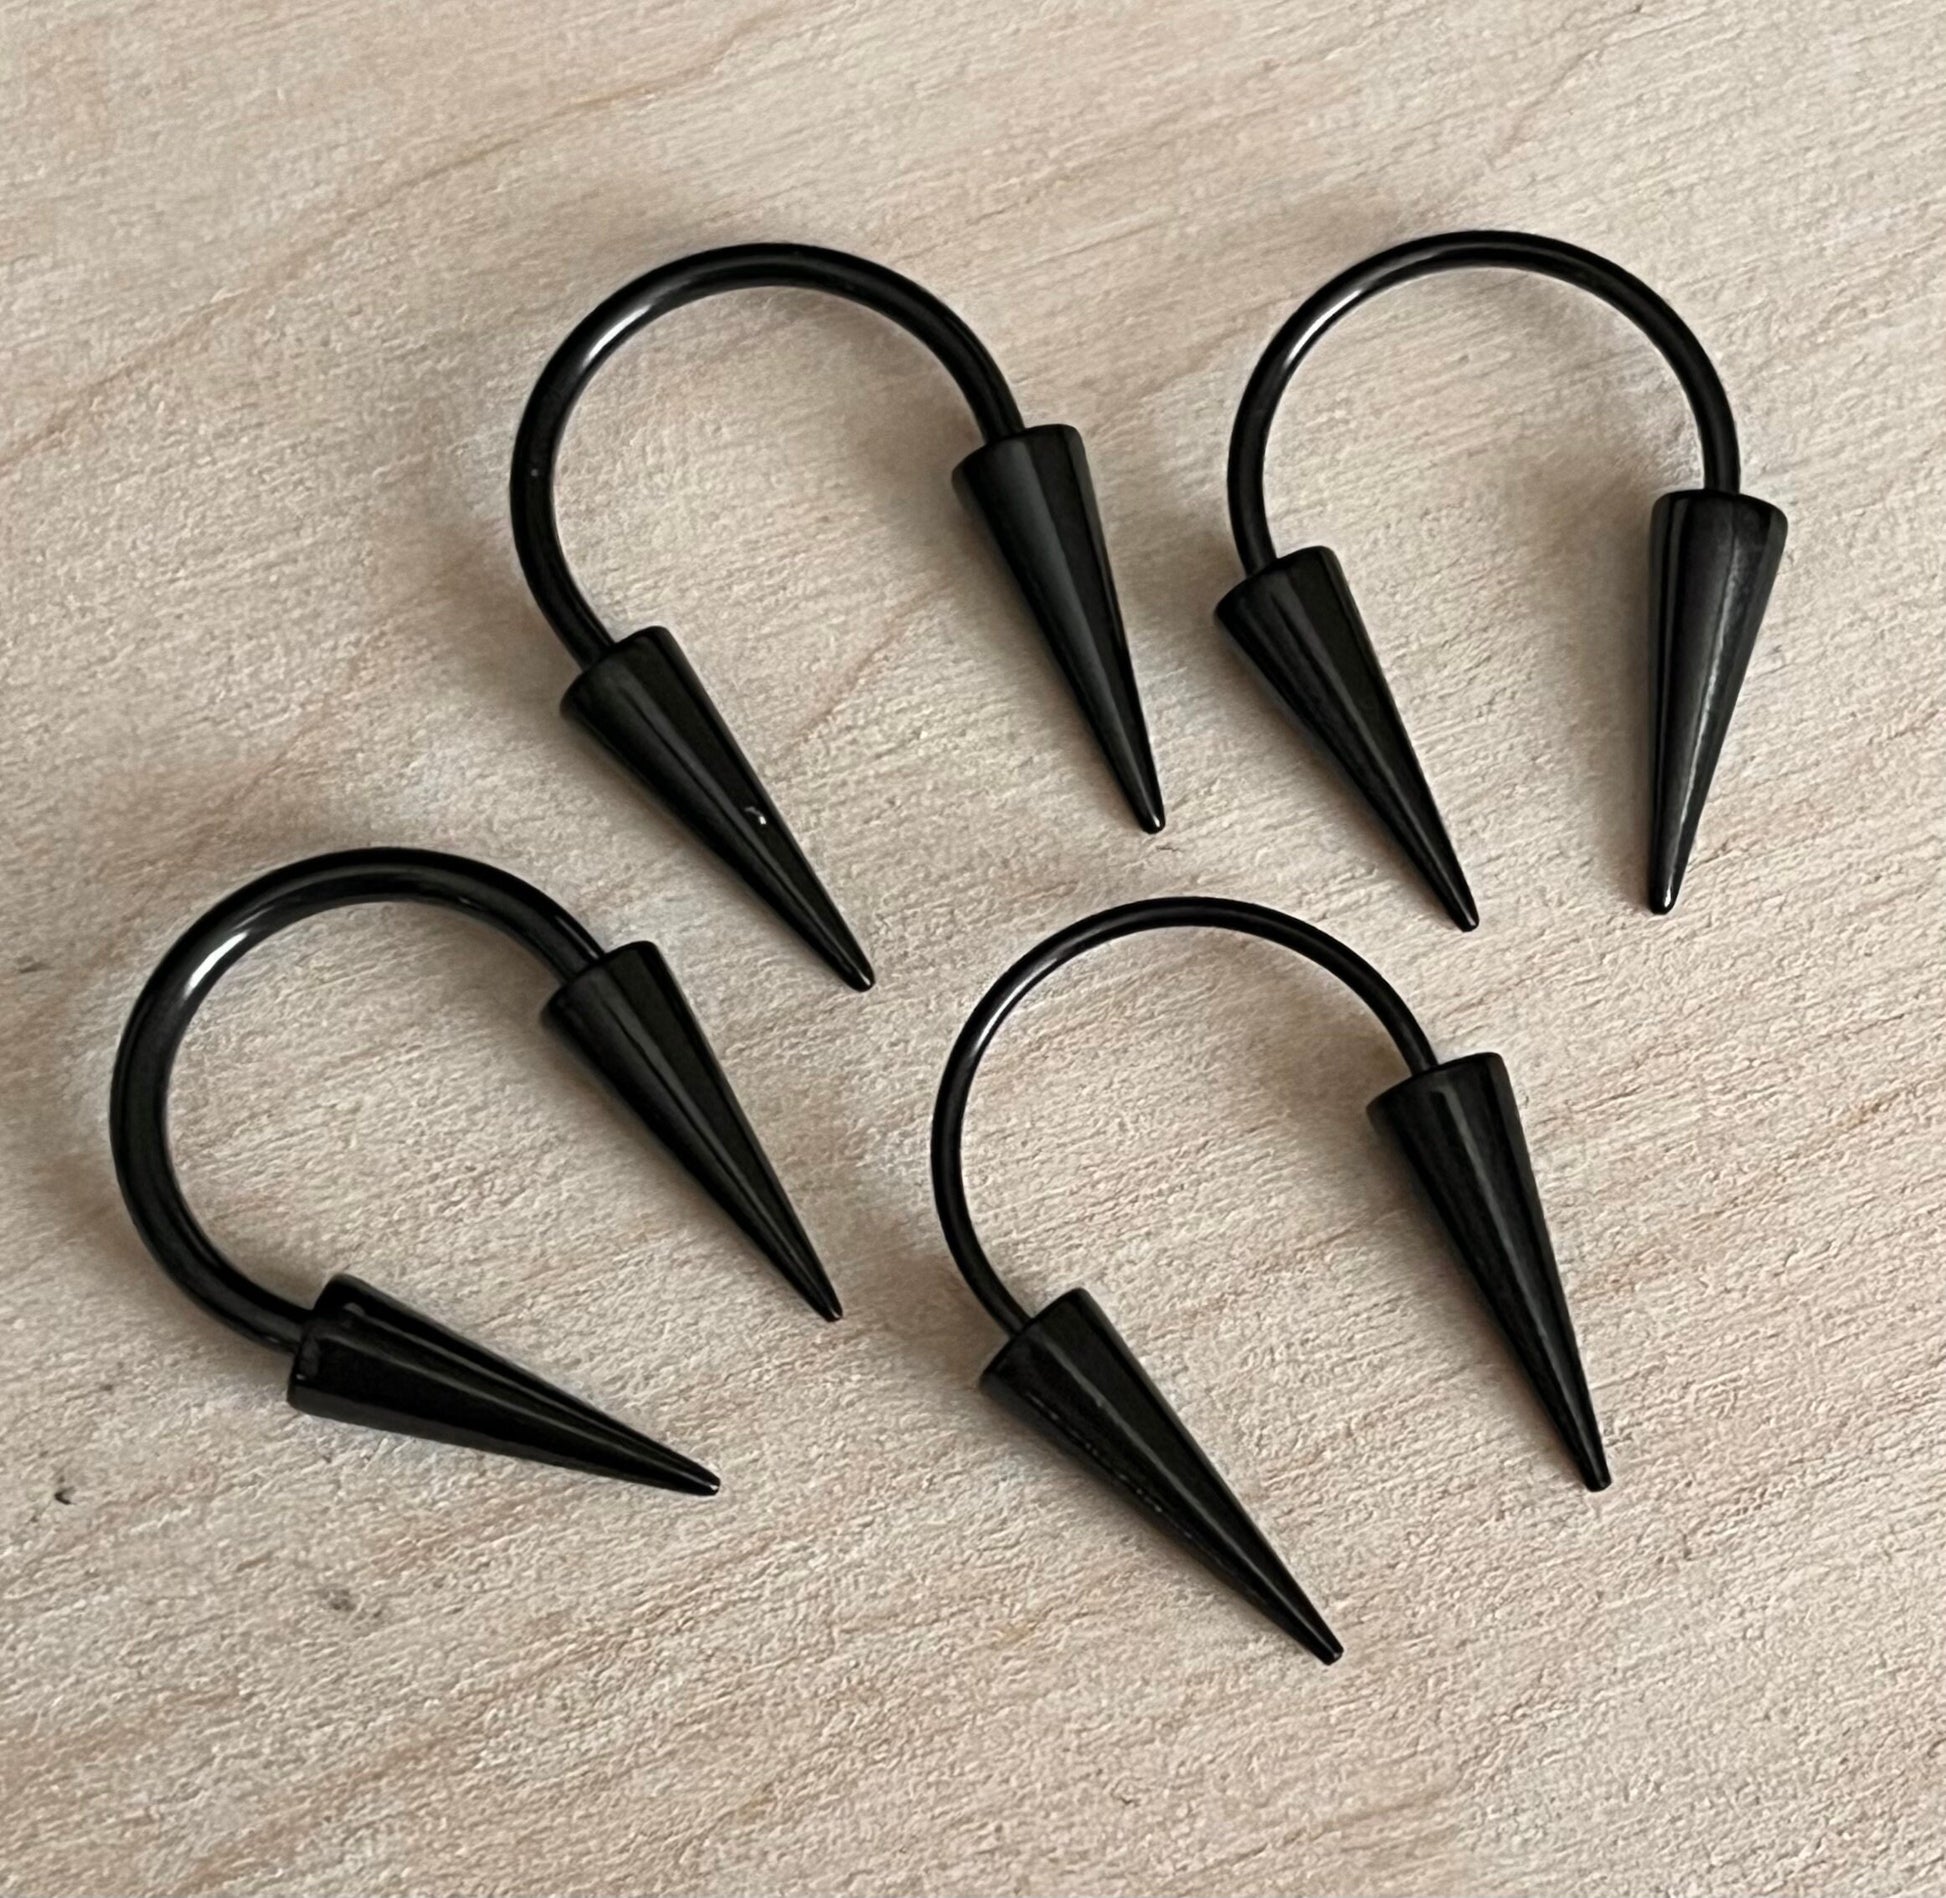 1pc of Unusual Long Spiked Circular Surgical Steel Barbell Horseshoe Ring - Gauges 14g, 16g, 18g or 20g in Black or Gold Available!